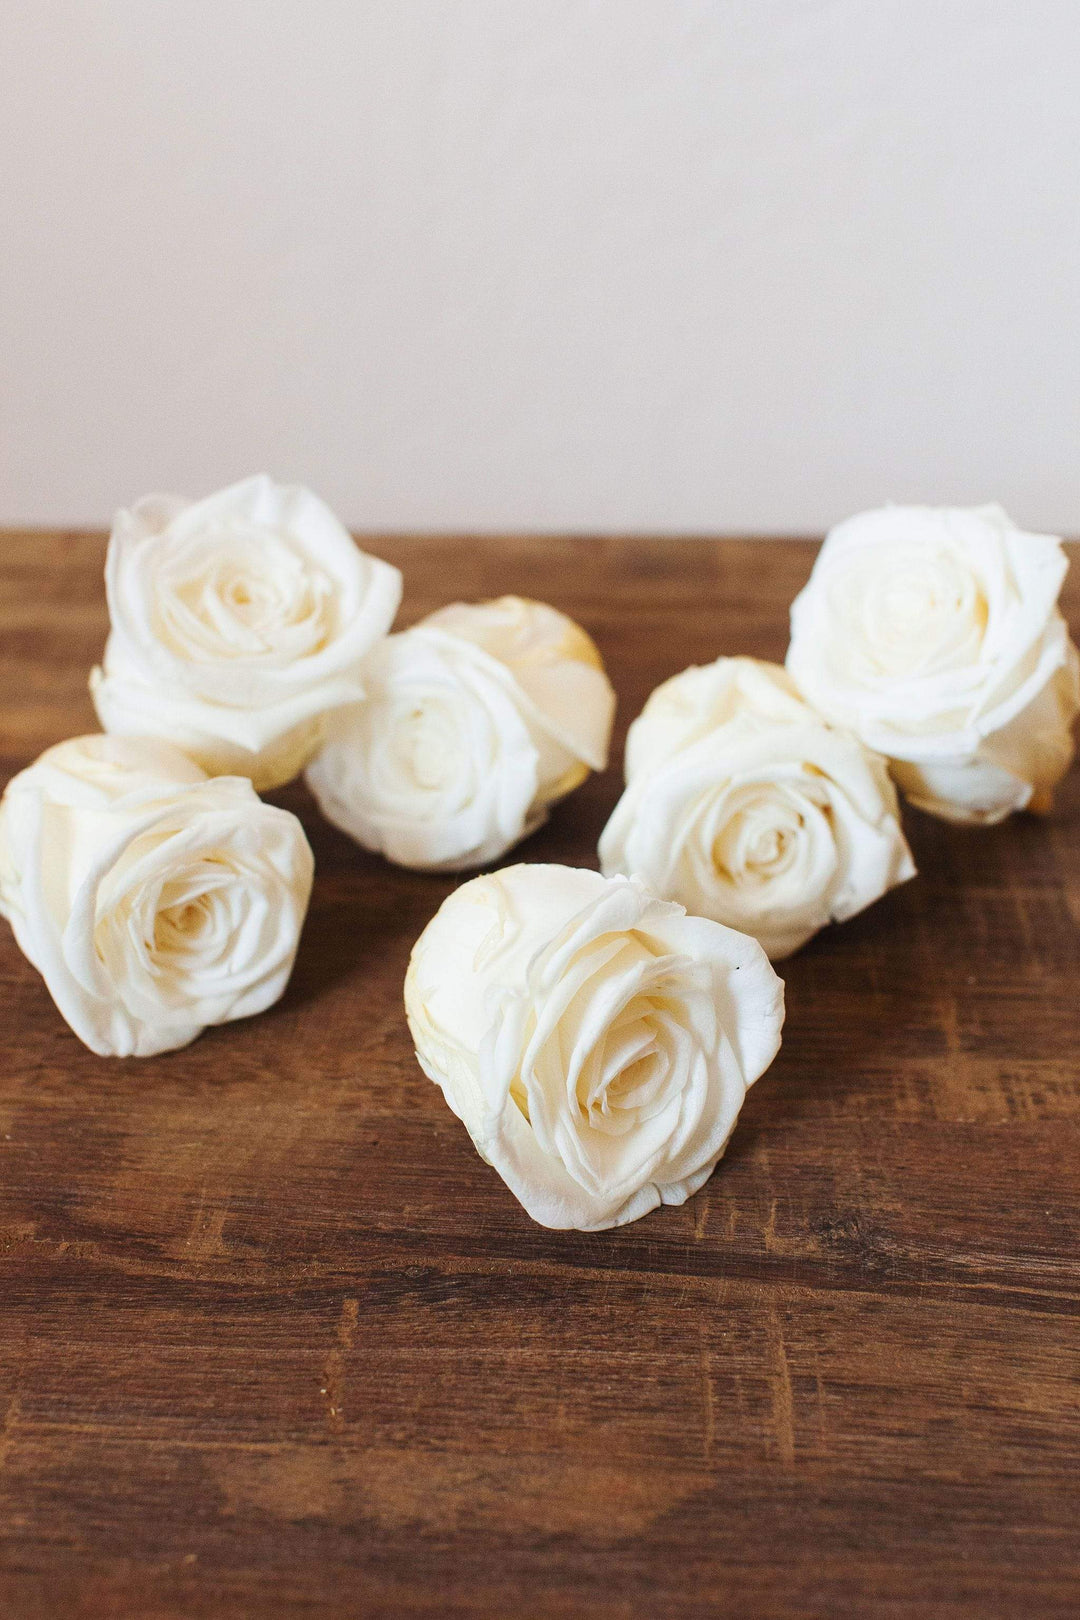 Idlewild Floral Co. White Rose Heads